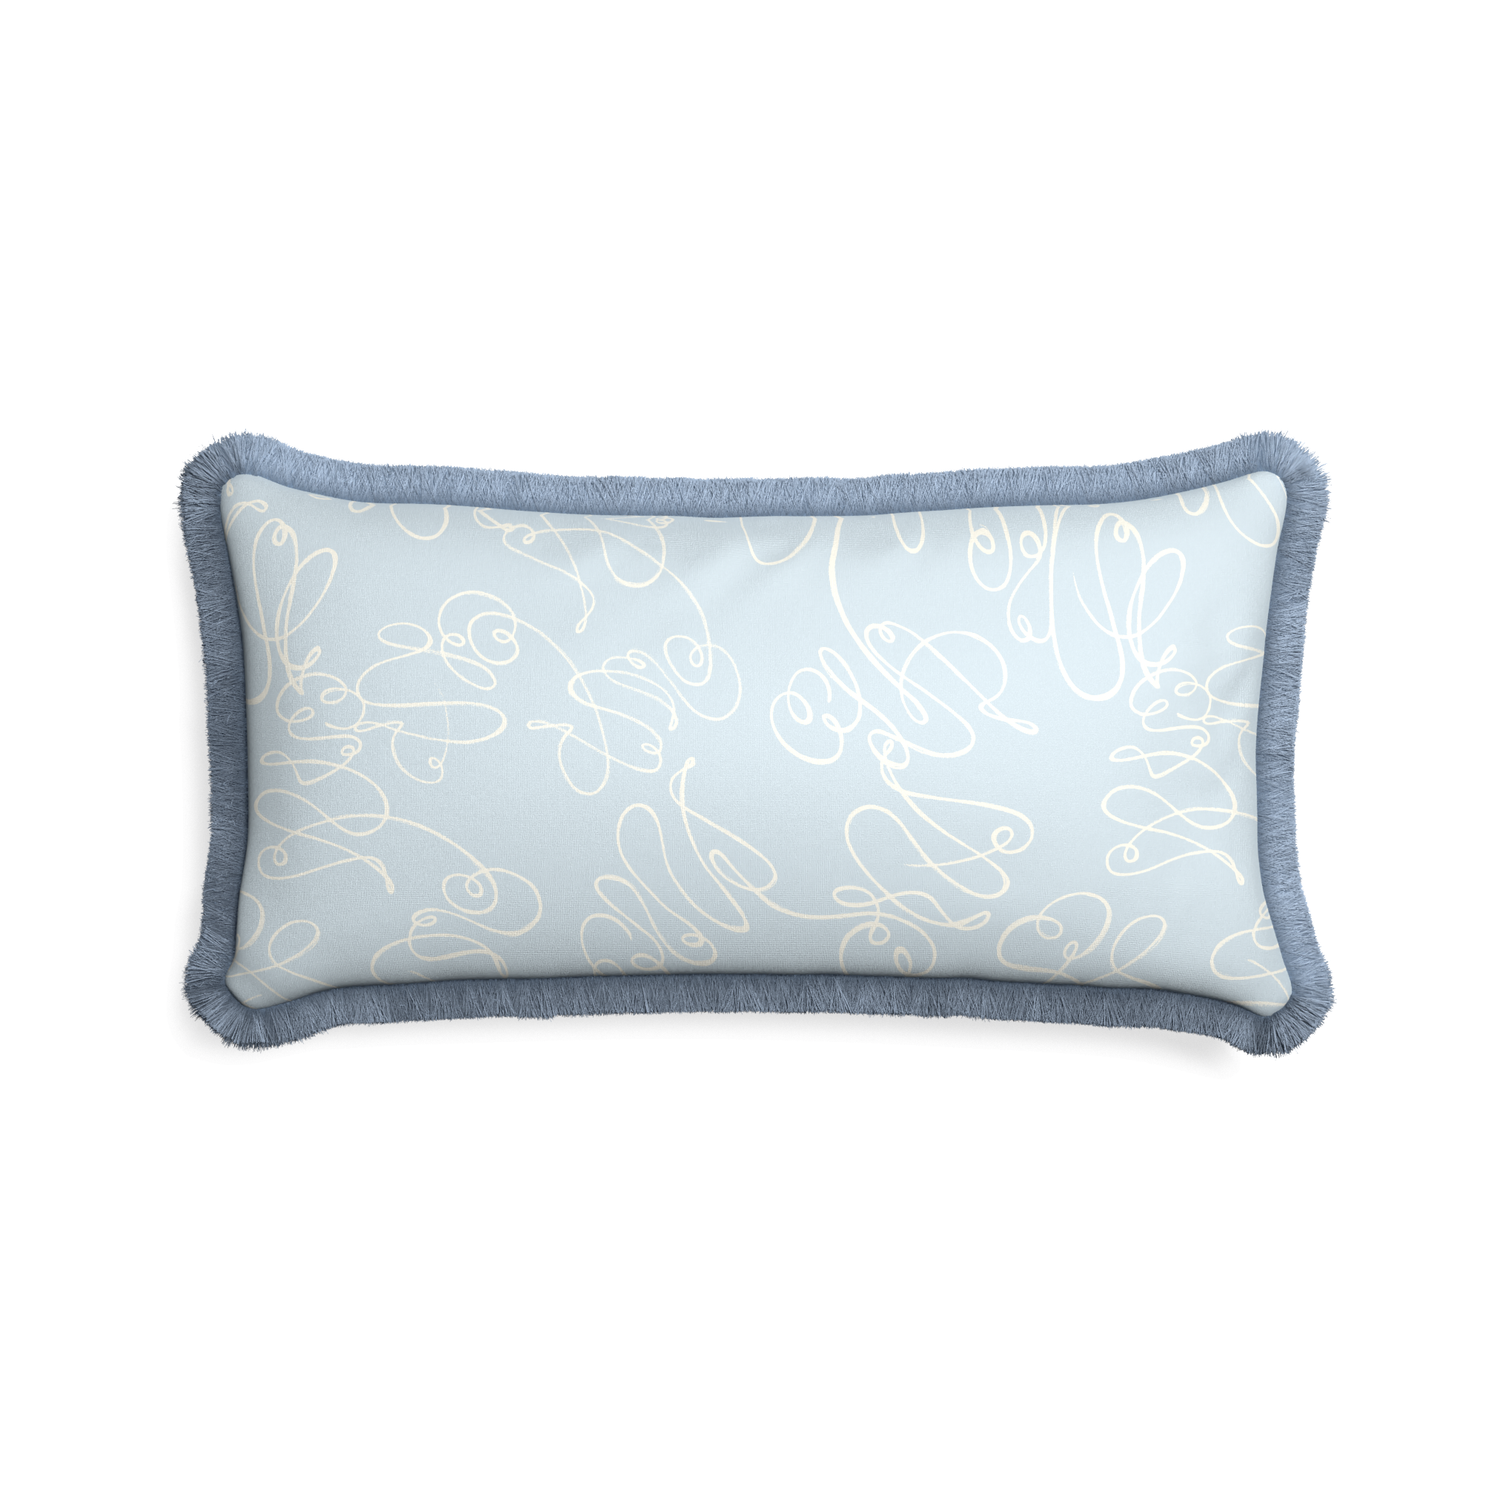 Midi-lumbar mirabella custom powder blue abstractpillow with sky fringe on white background